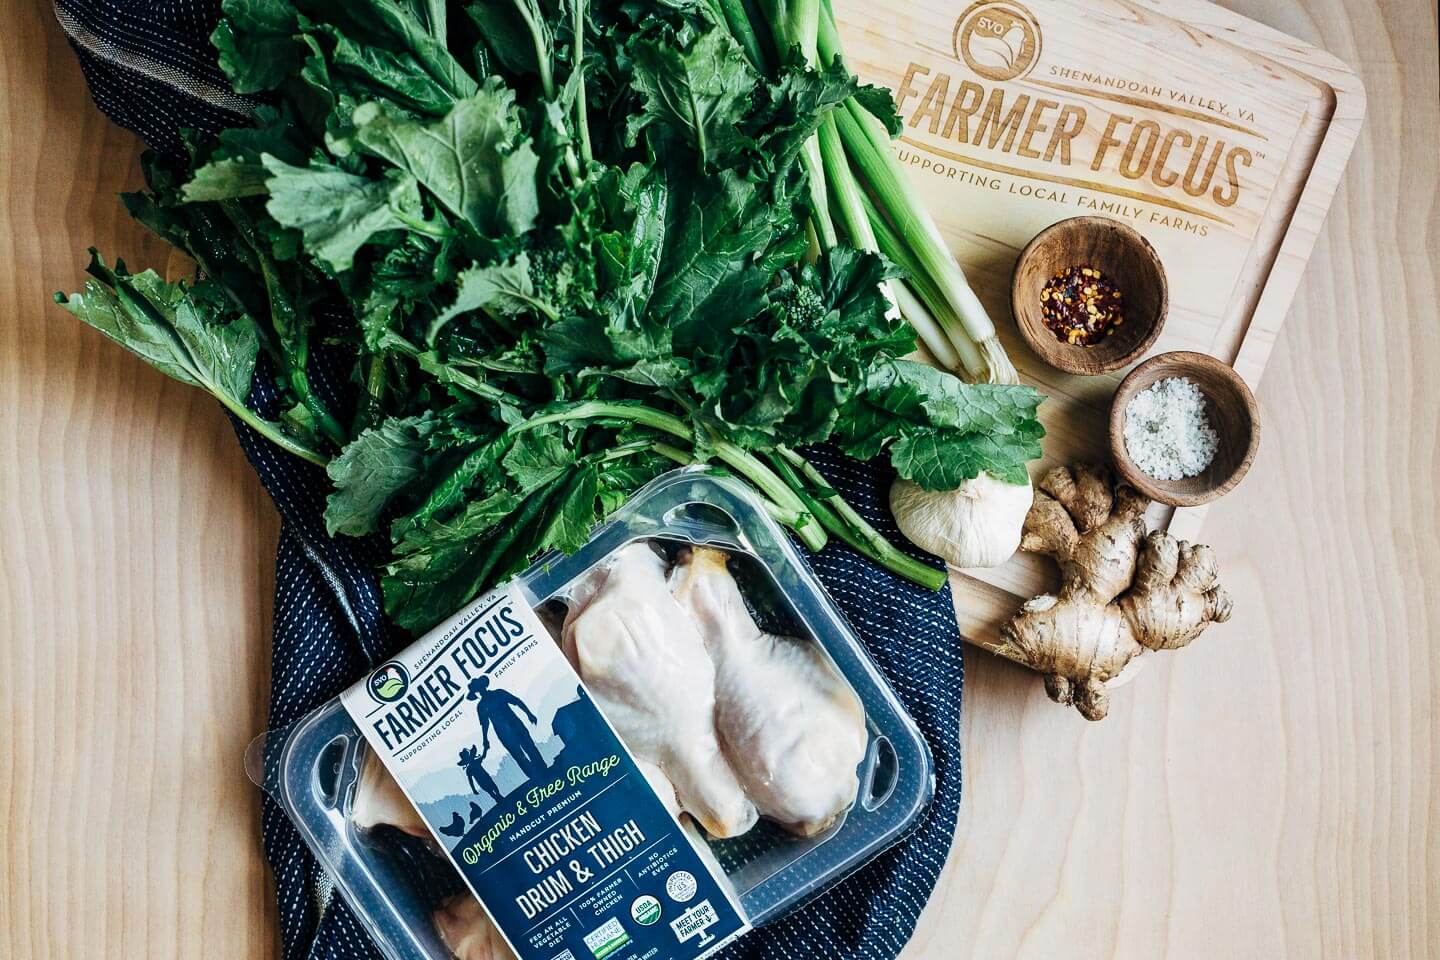 Farmer Focus Chicken Drums and Thighs and broccoli rabe are the main ingredients for this simple skillet chicken recipe. 